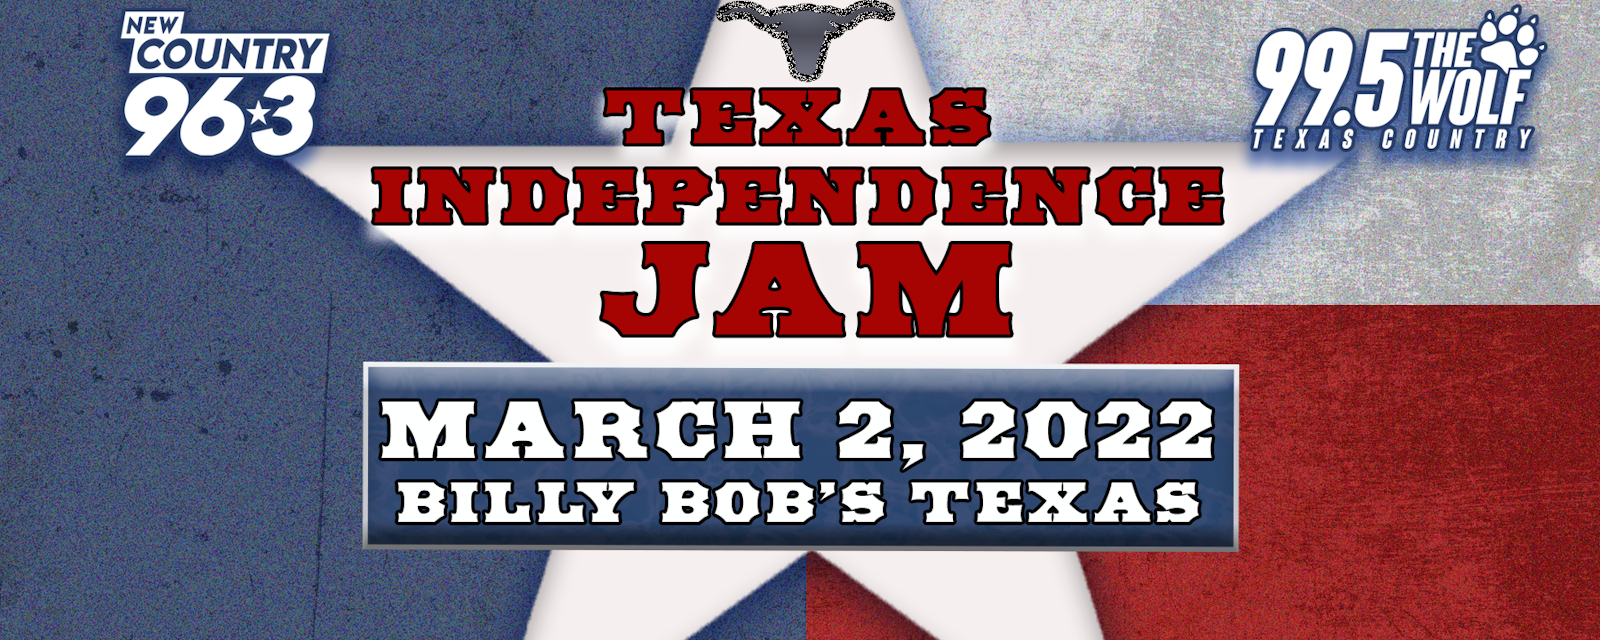 99.5 The Wolf and New Country 96.3's Texas Independence Jam Billy Bob